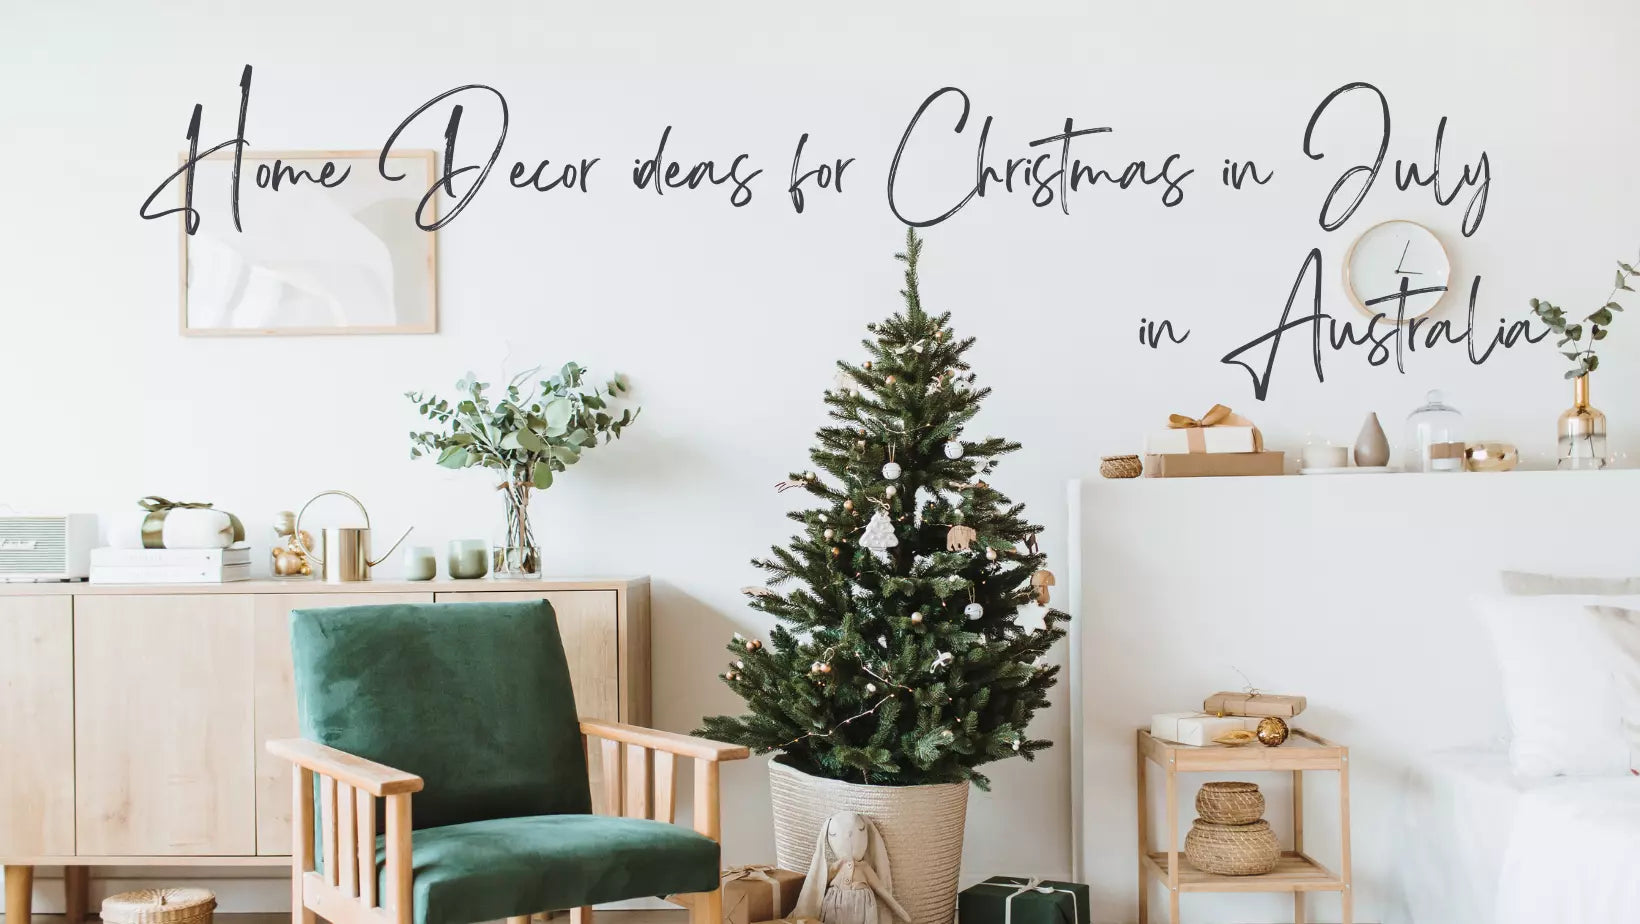 Home Decor ideas for Christmas in July. | House of Dudley